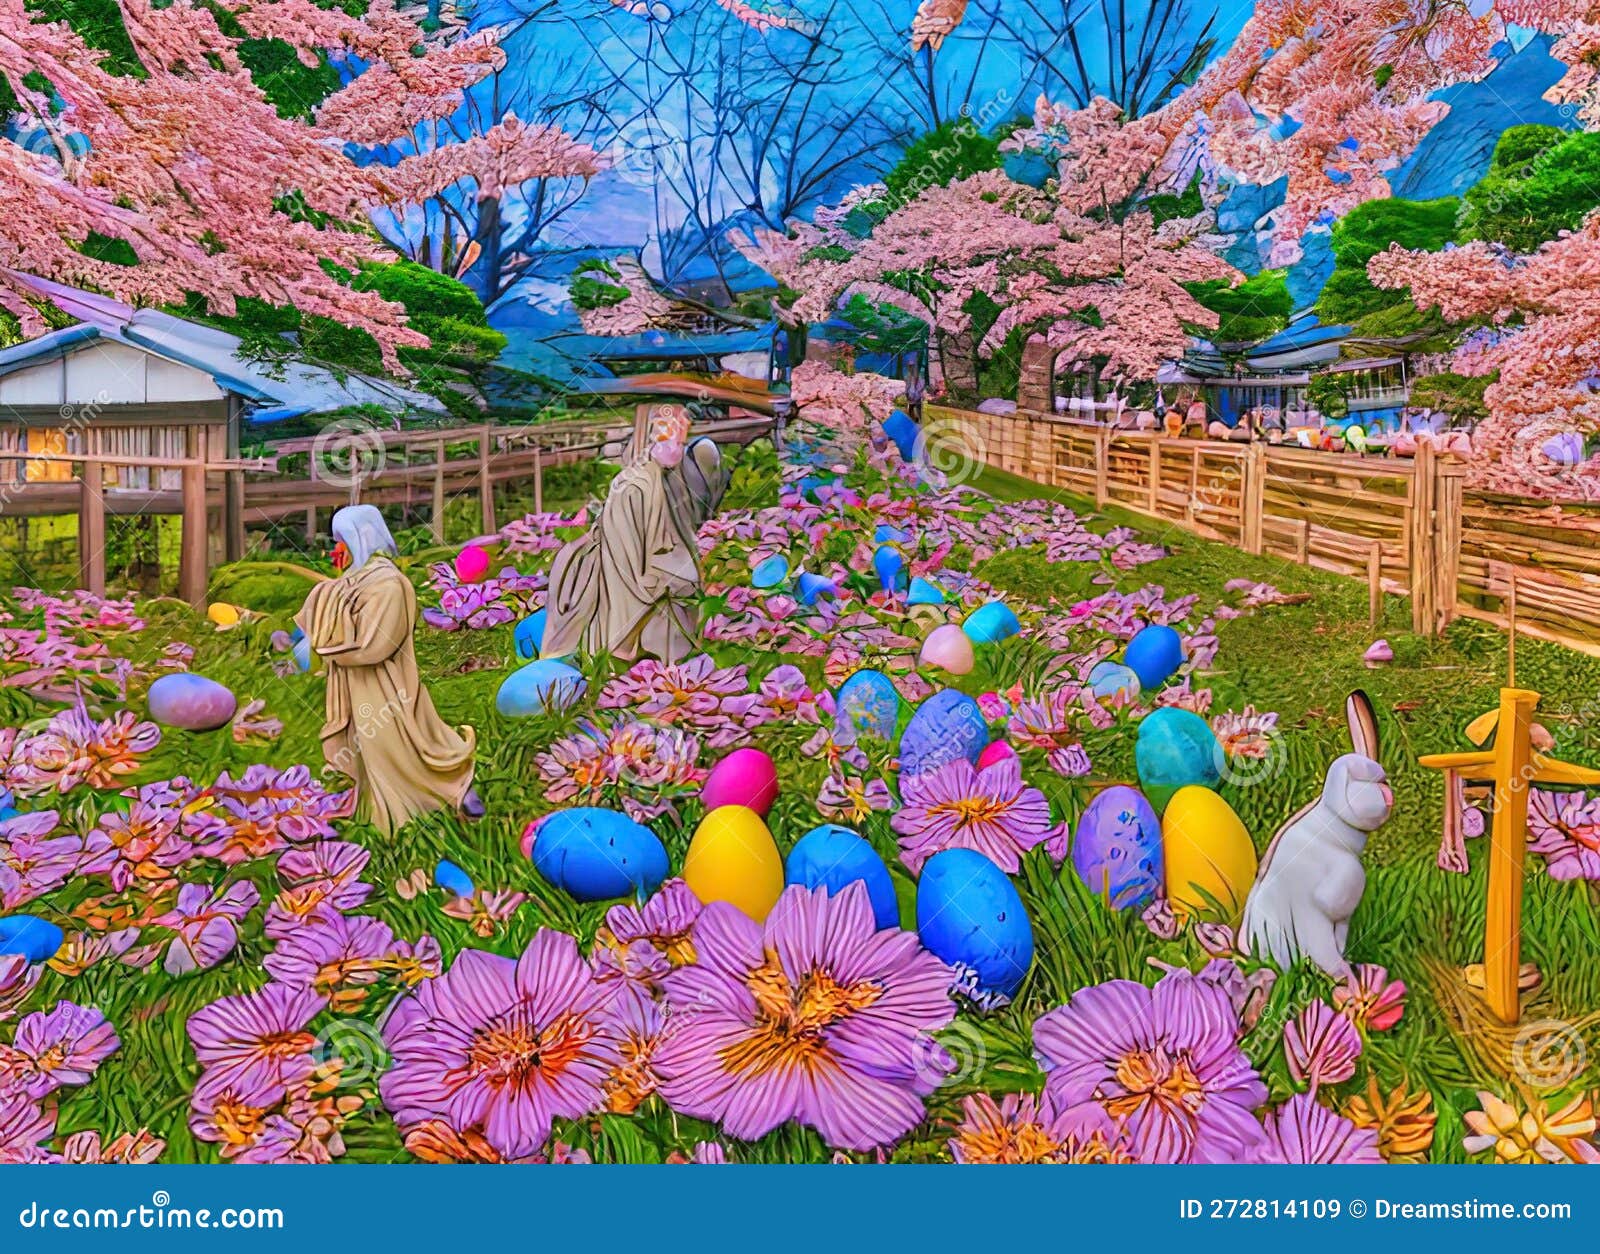 easter holiday scene in hino,t?ky?,japan.